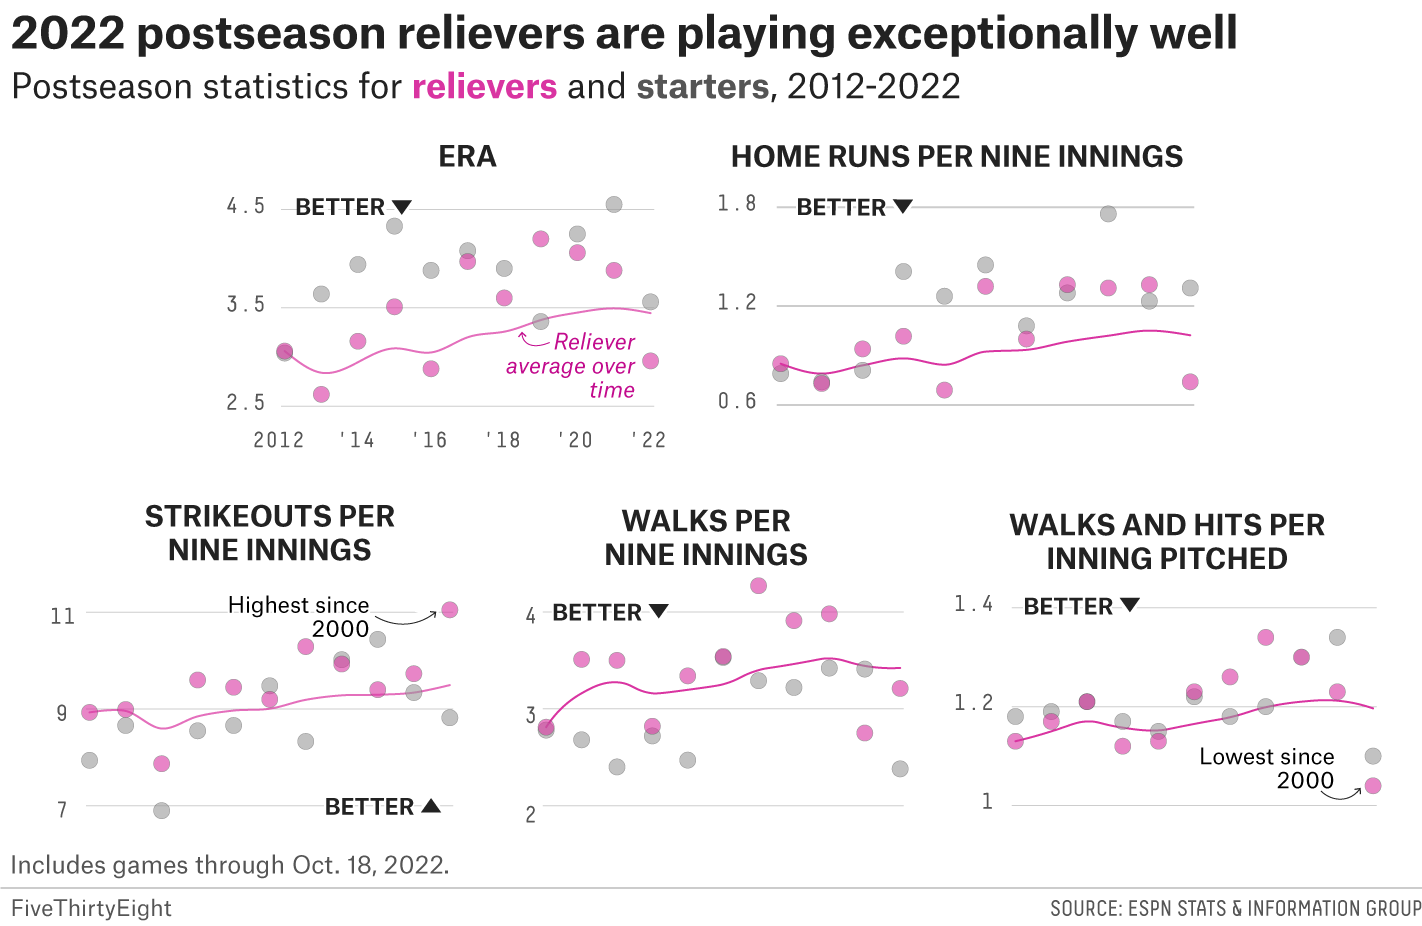 A series of small charts show how postseason relievers are playing better this season than in previous ones across five different metrics. 